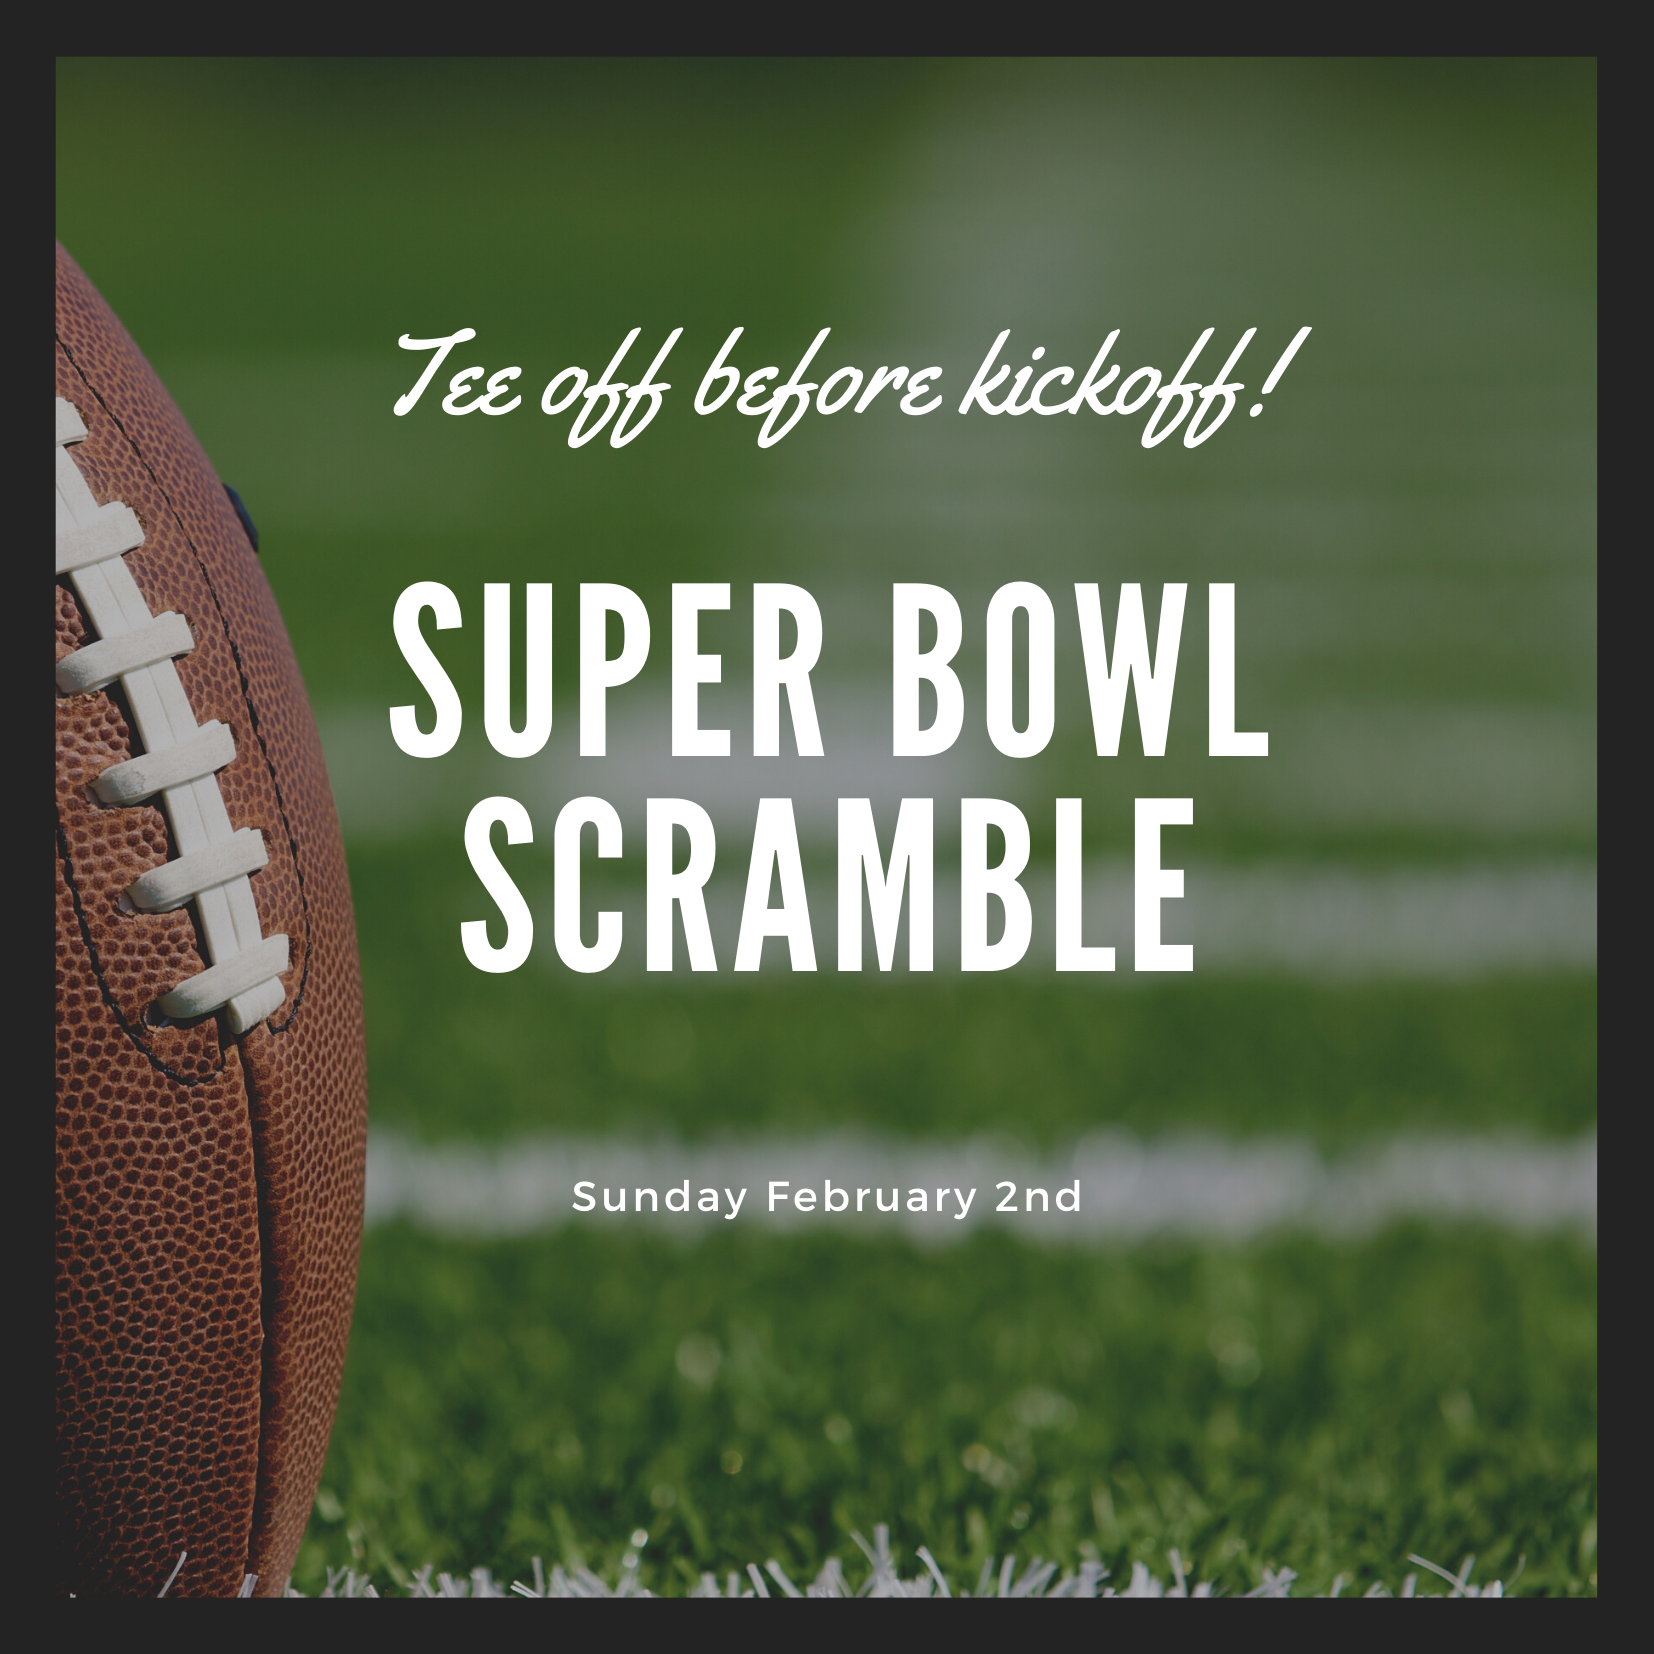 Join us for the Super Bowl Scramble!